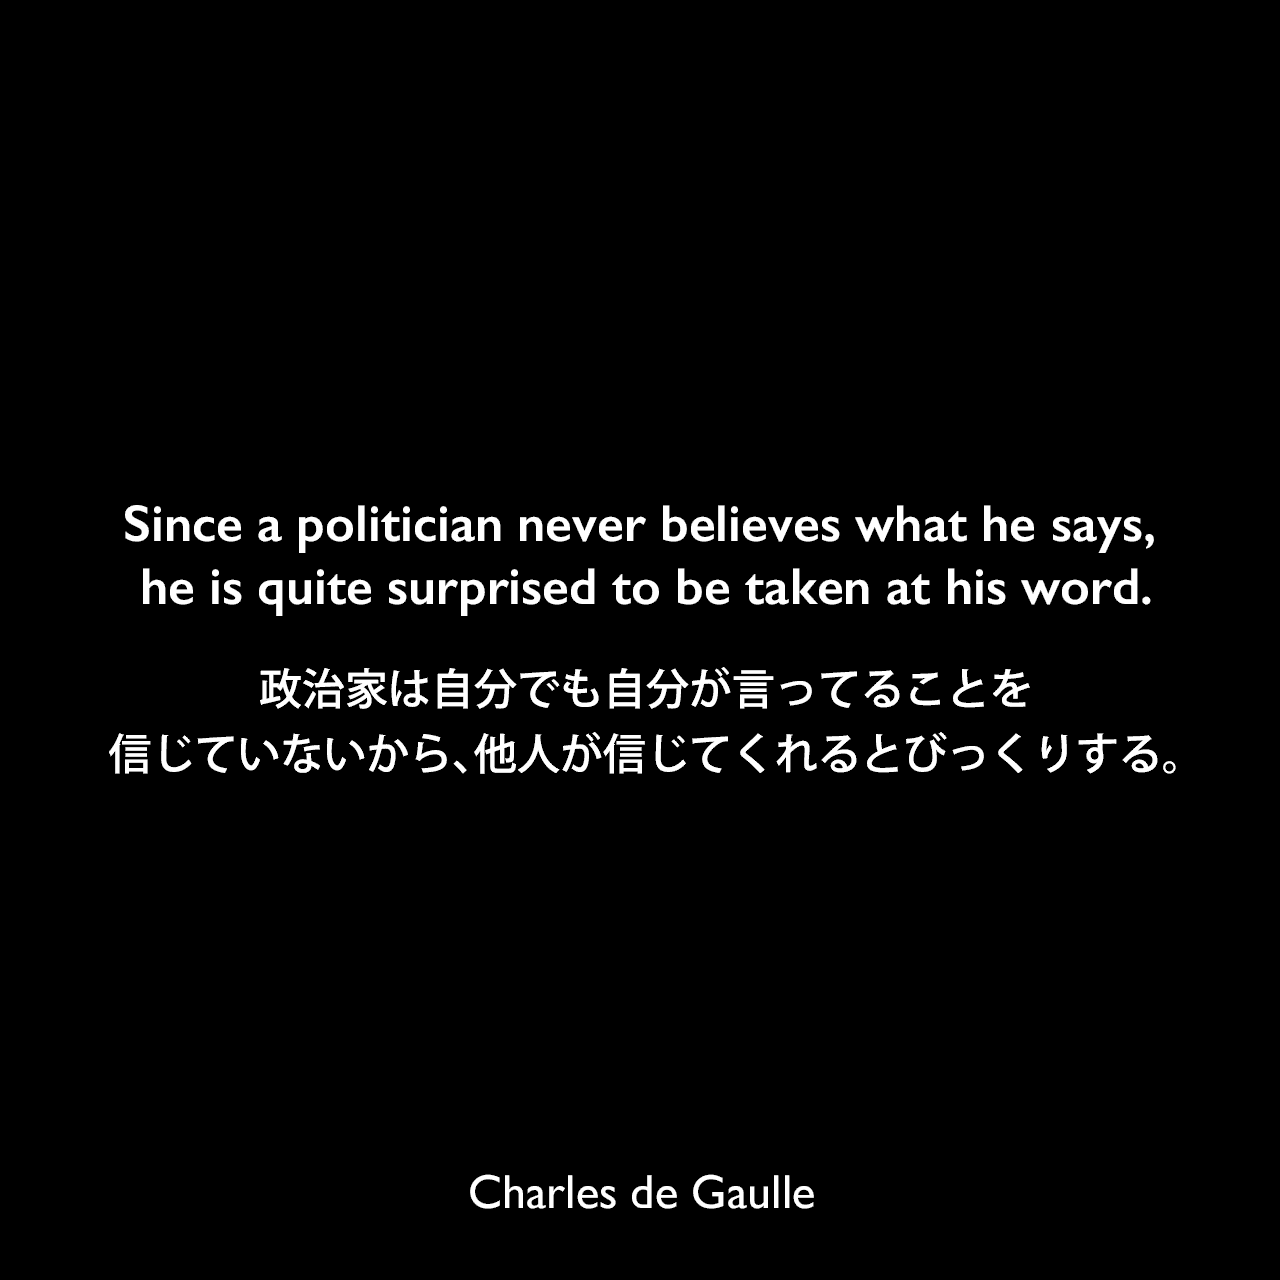 Since a politician never believes what he says, he is quite surprised to be taken at his word.政治家は自分でも自分が言ってることを信じていないから、他人が信じてくれるとびっくりする。Charles de Gaulle